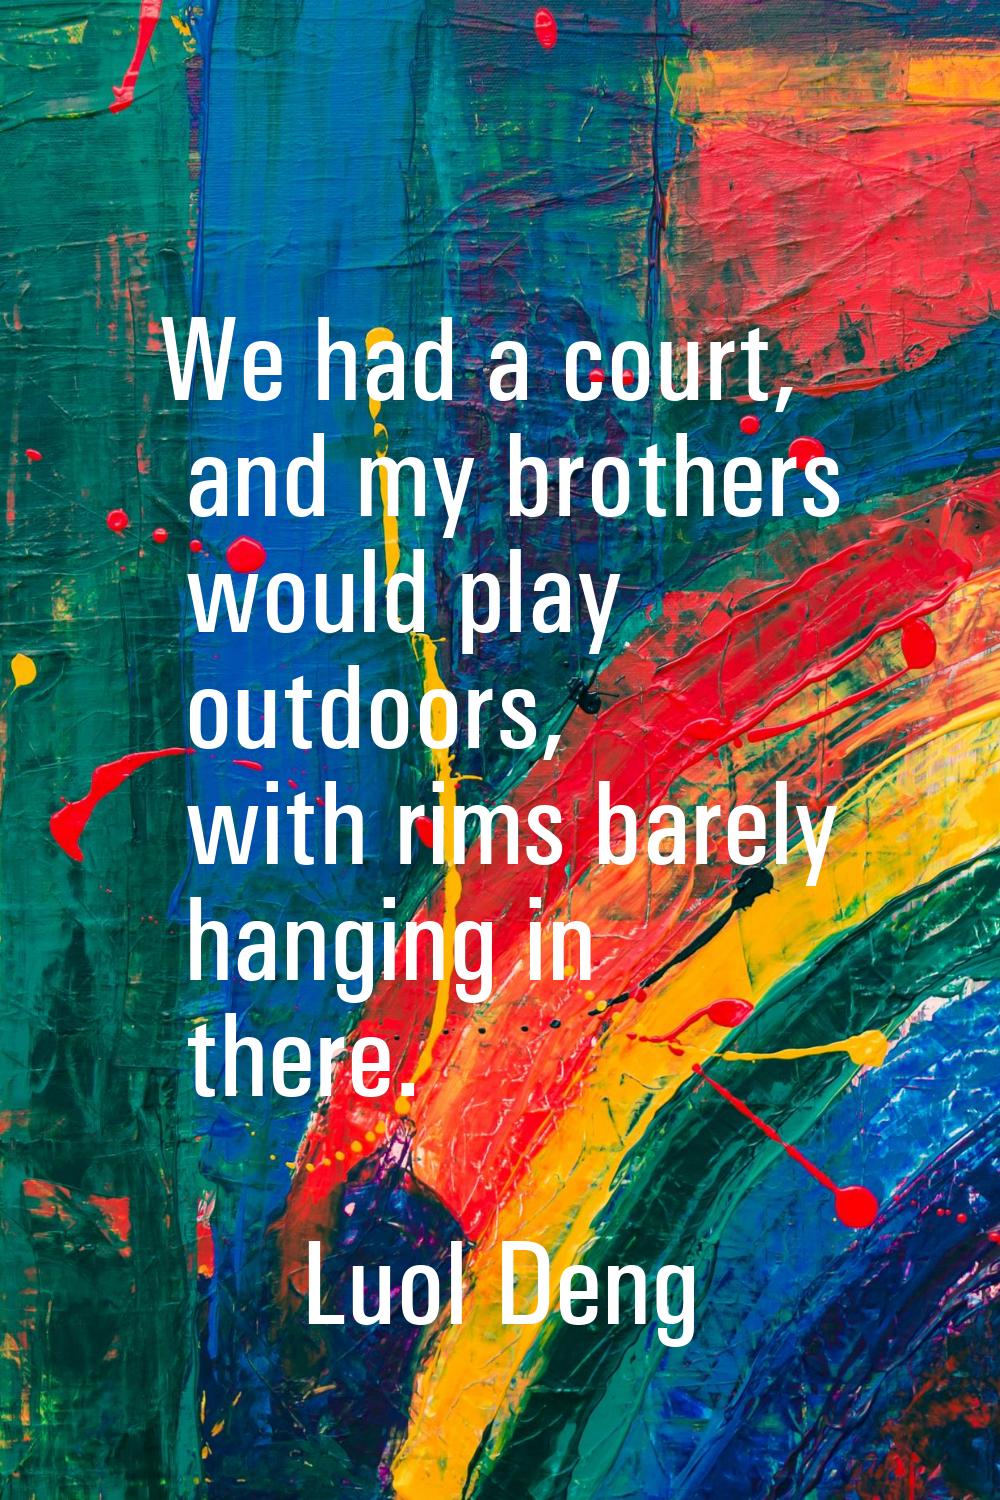 We had a court, and my brothers would play outdoors, with rims barely hanging in there.